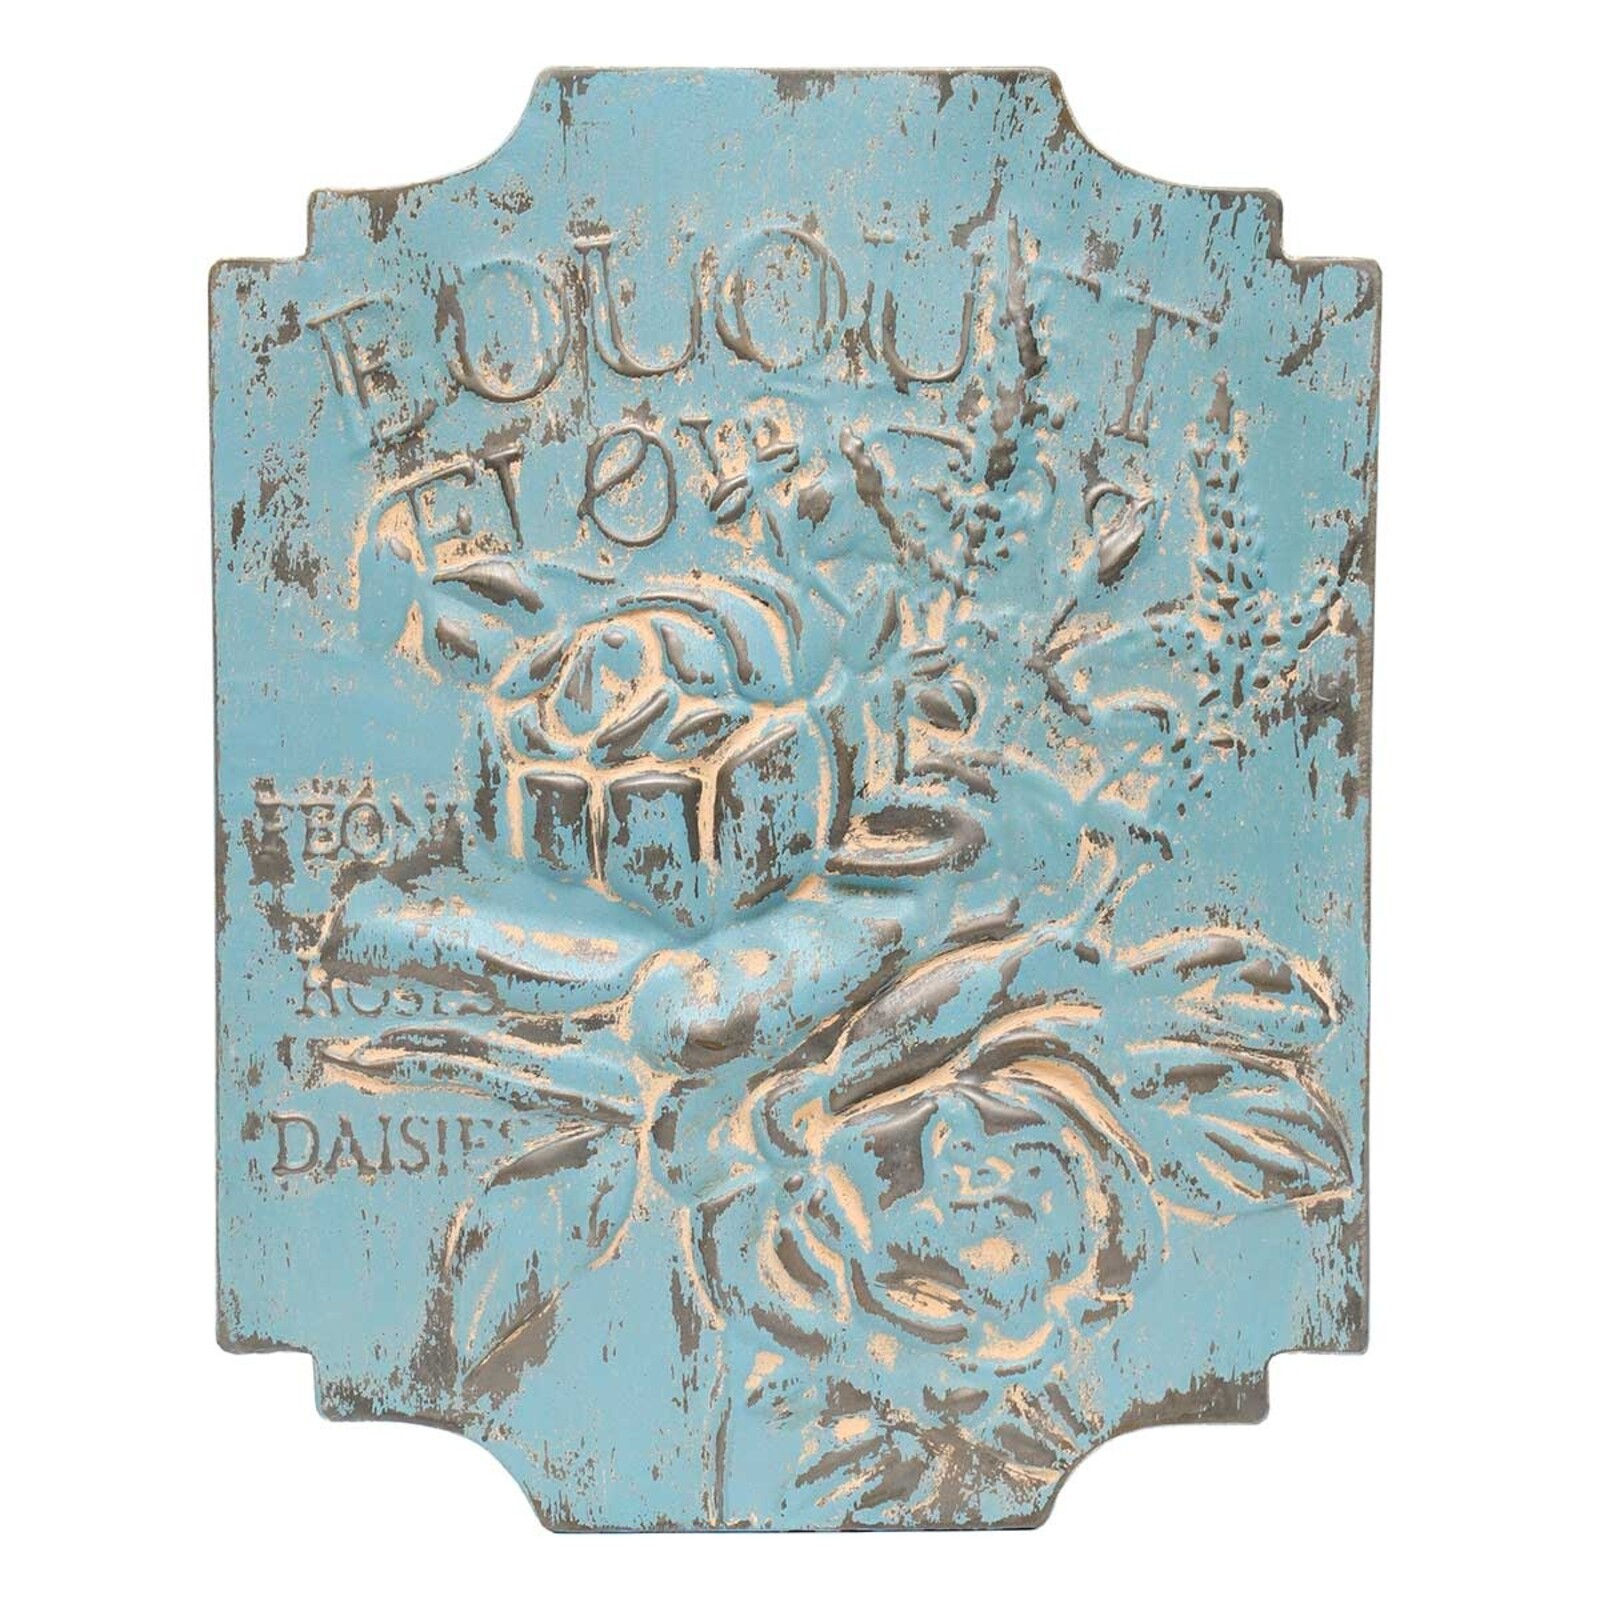 Meravic ANTIQUE BLUE METAL "BOUQUET" WALL SIGN   A2693 loading=